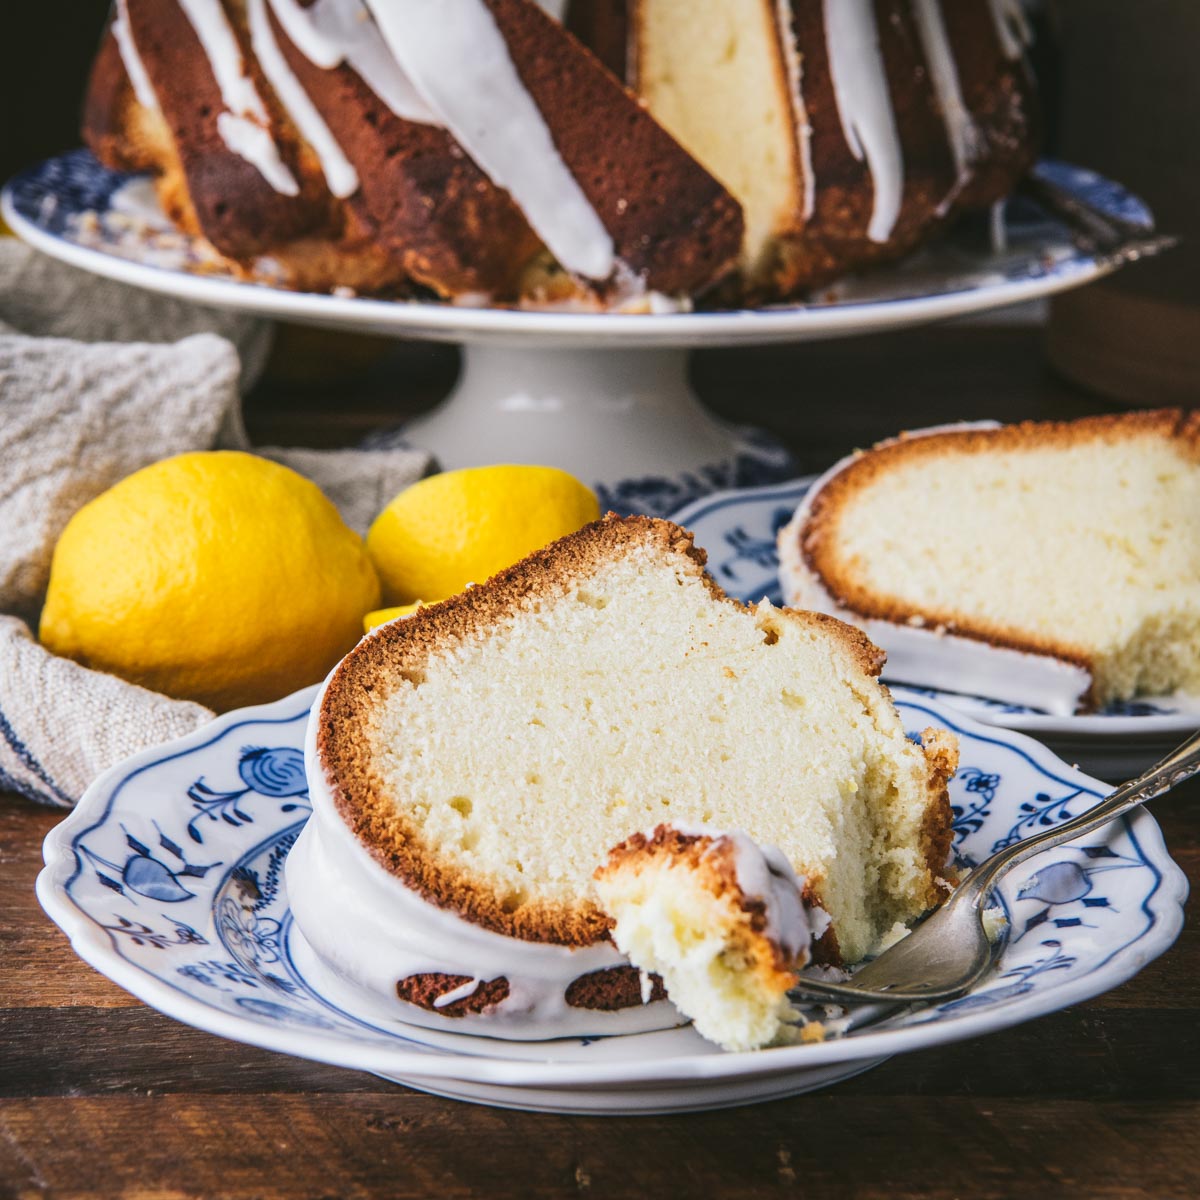 Square side shot of a slice of lemon pound cake on a blue and white plate with a fork.